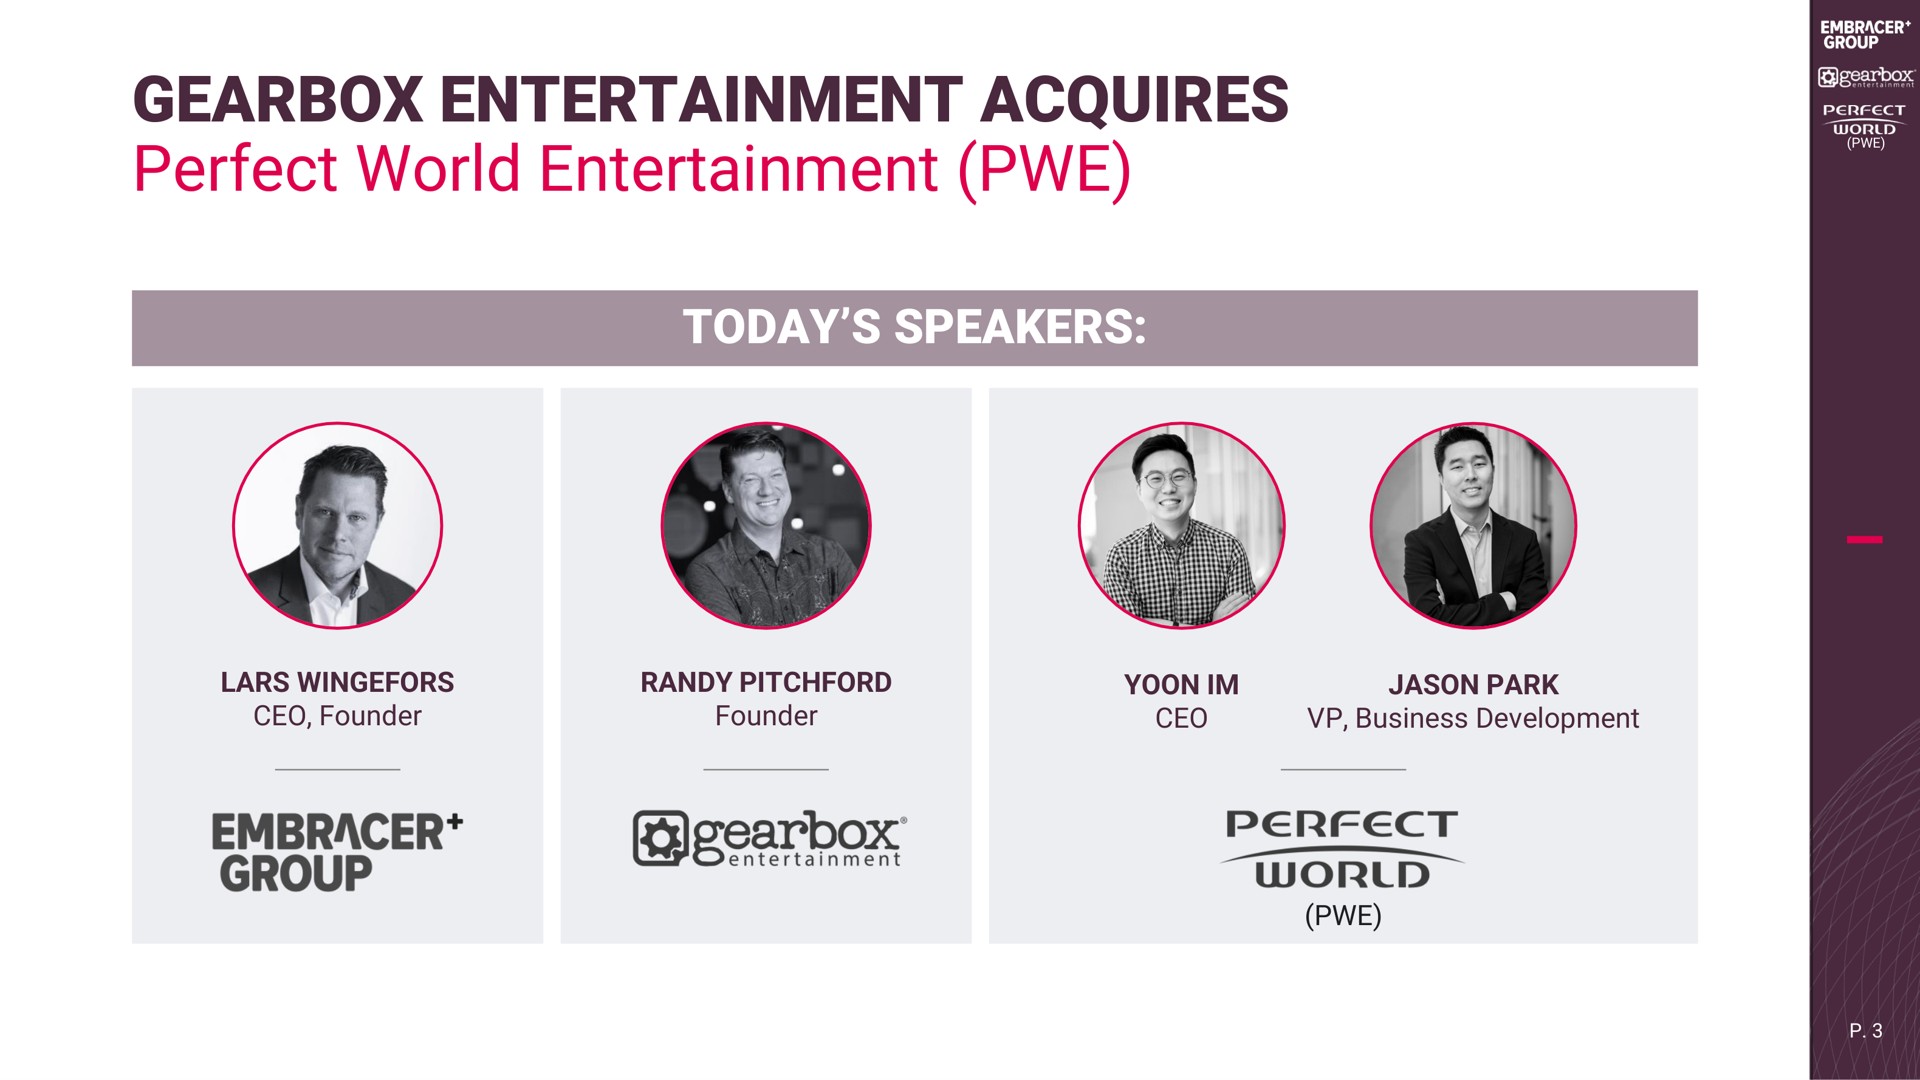 gearbox entertainment acquires perfect world entertainment today speakers embracer group | Embracer Group